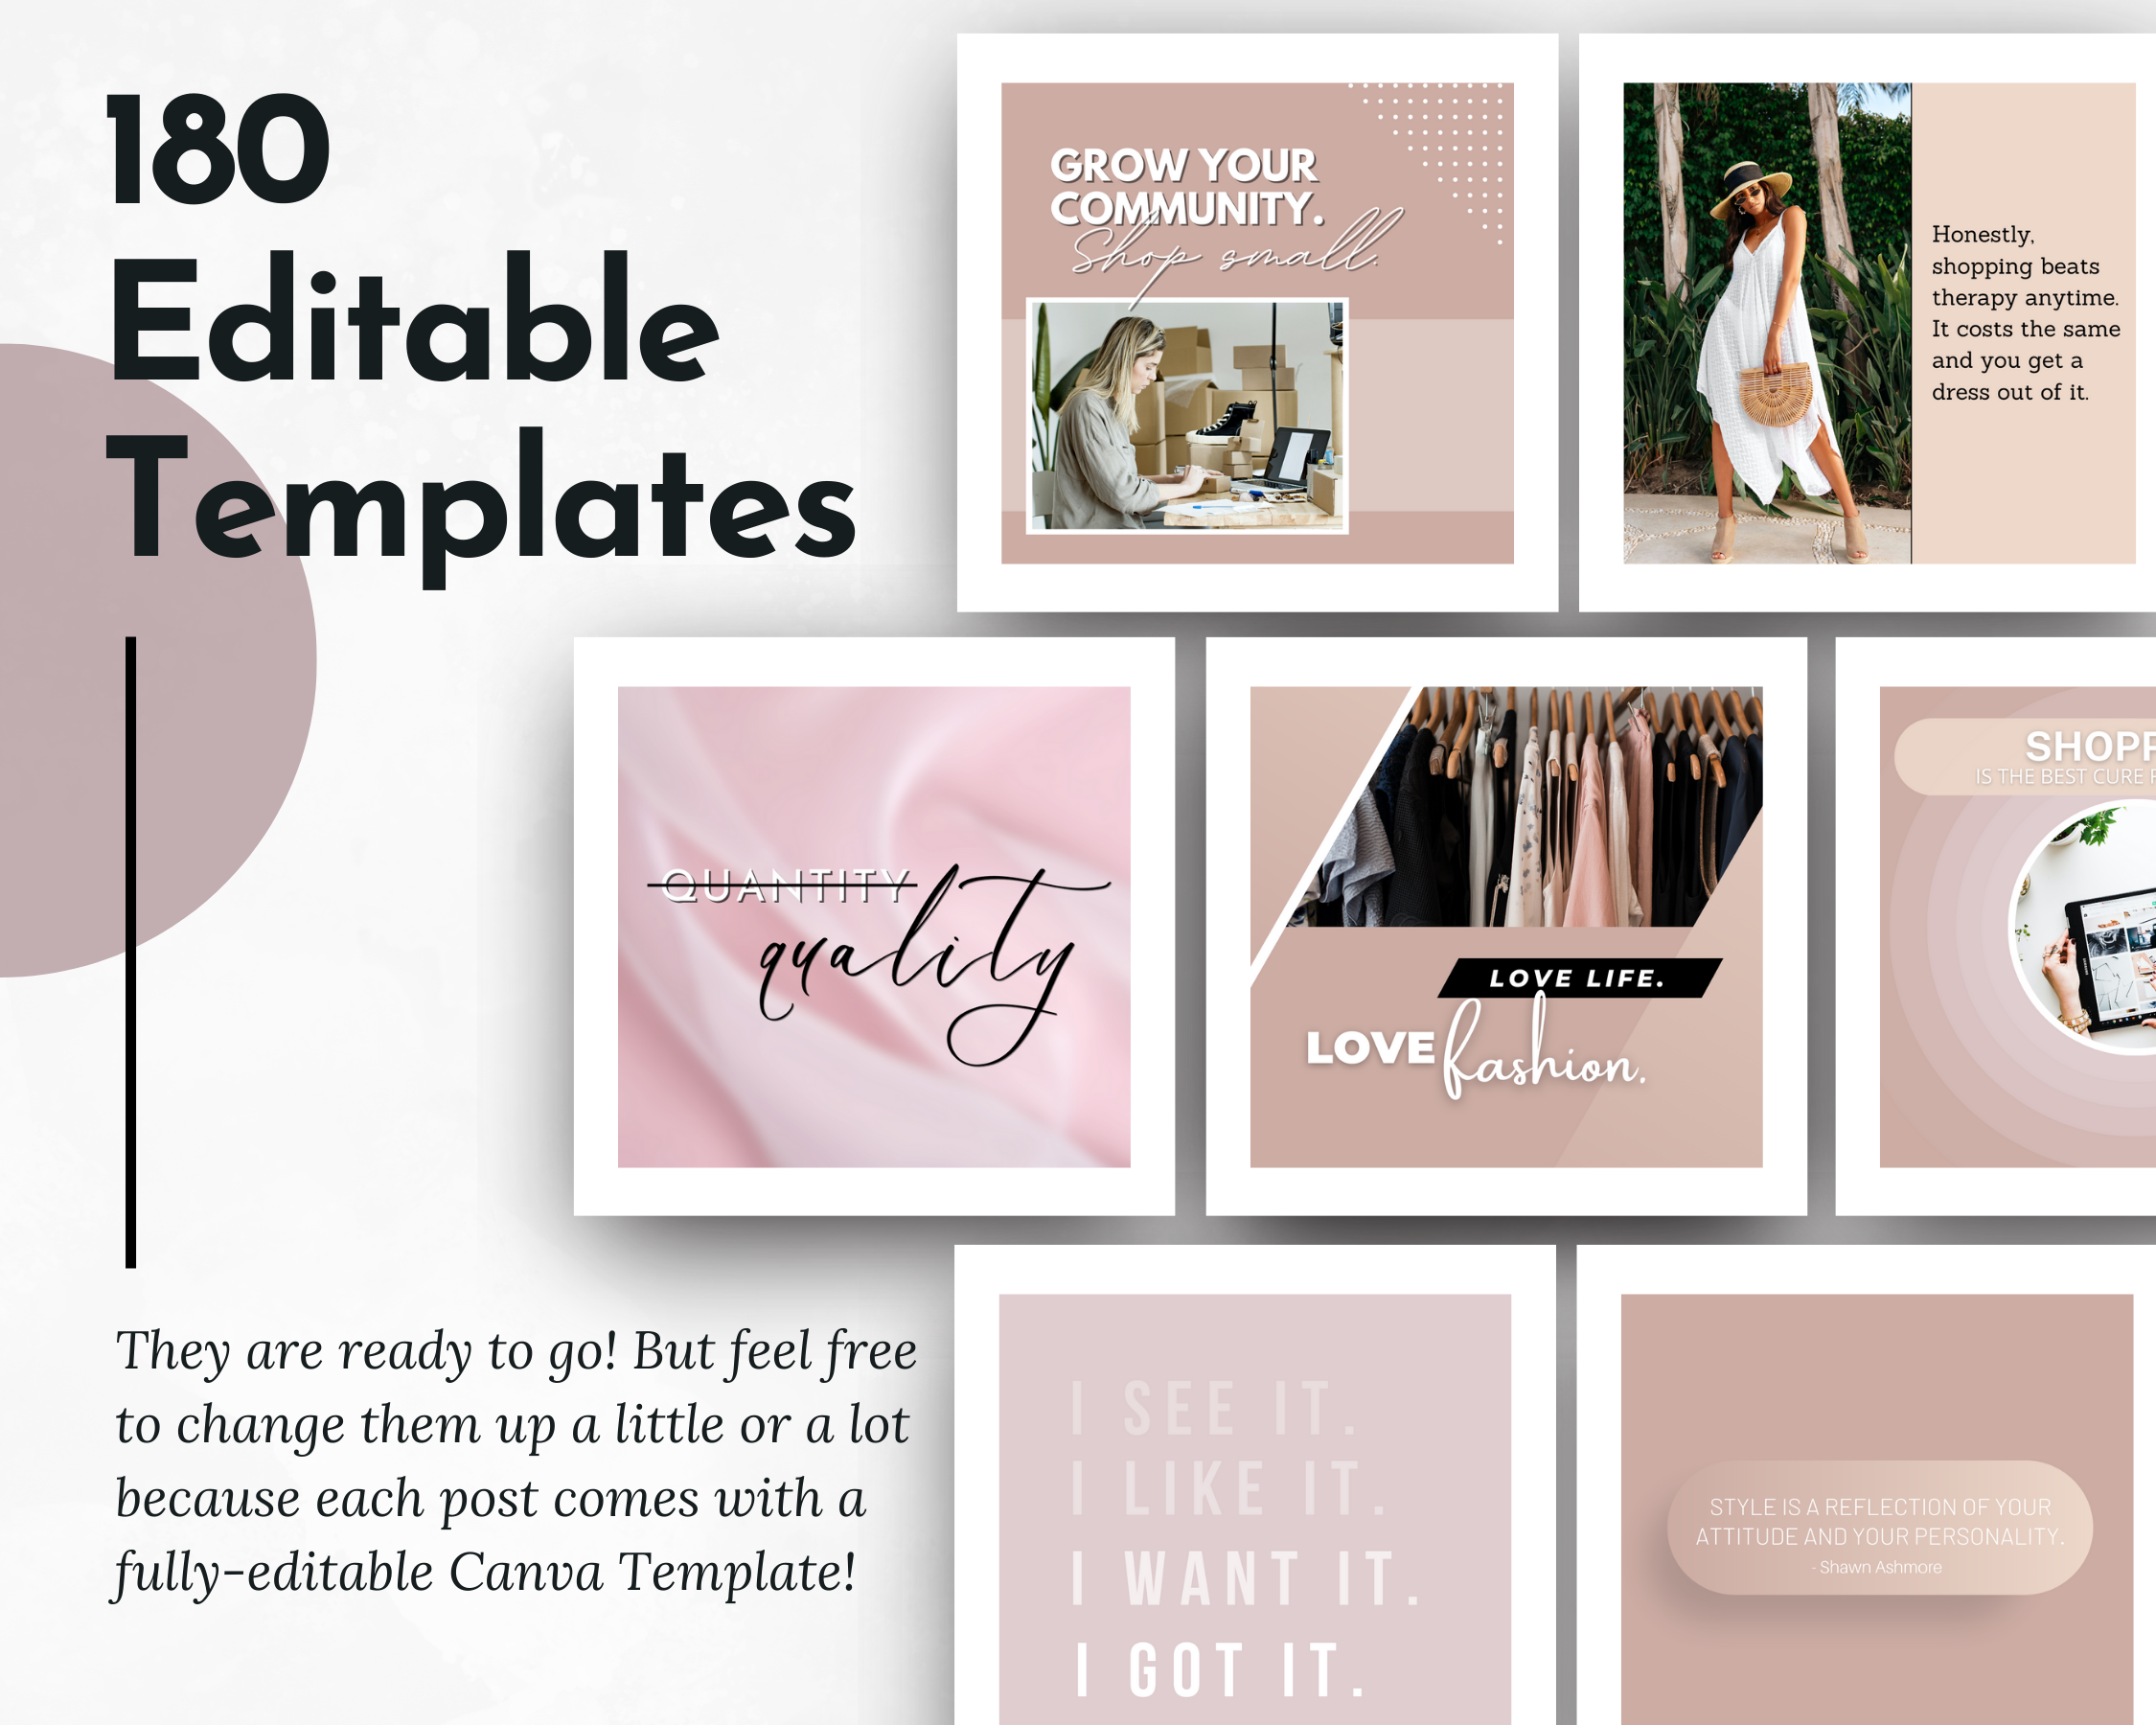 A set of Boutique & Style Store Social Media Post Bundle with Canva Templates, perfect for Instagram images and ready-to-post text captions. Brand Name: Socially Inclined.